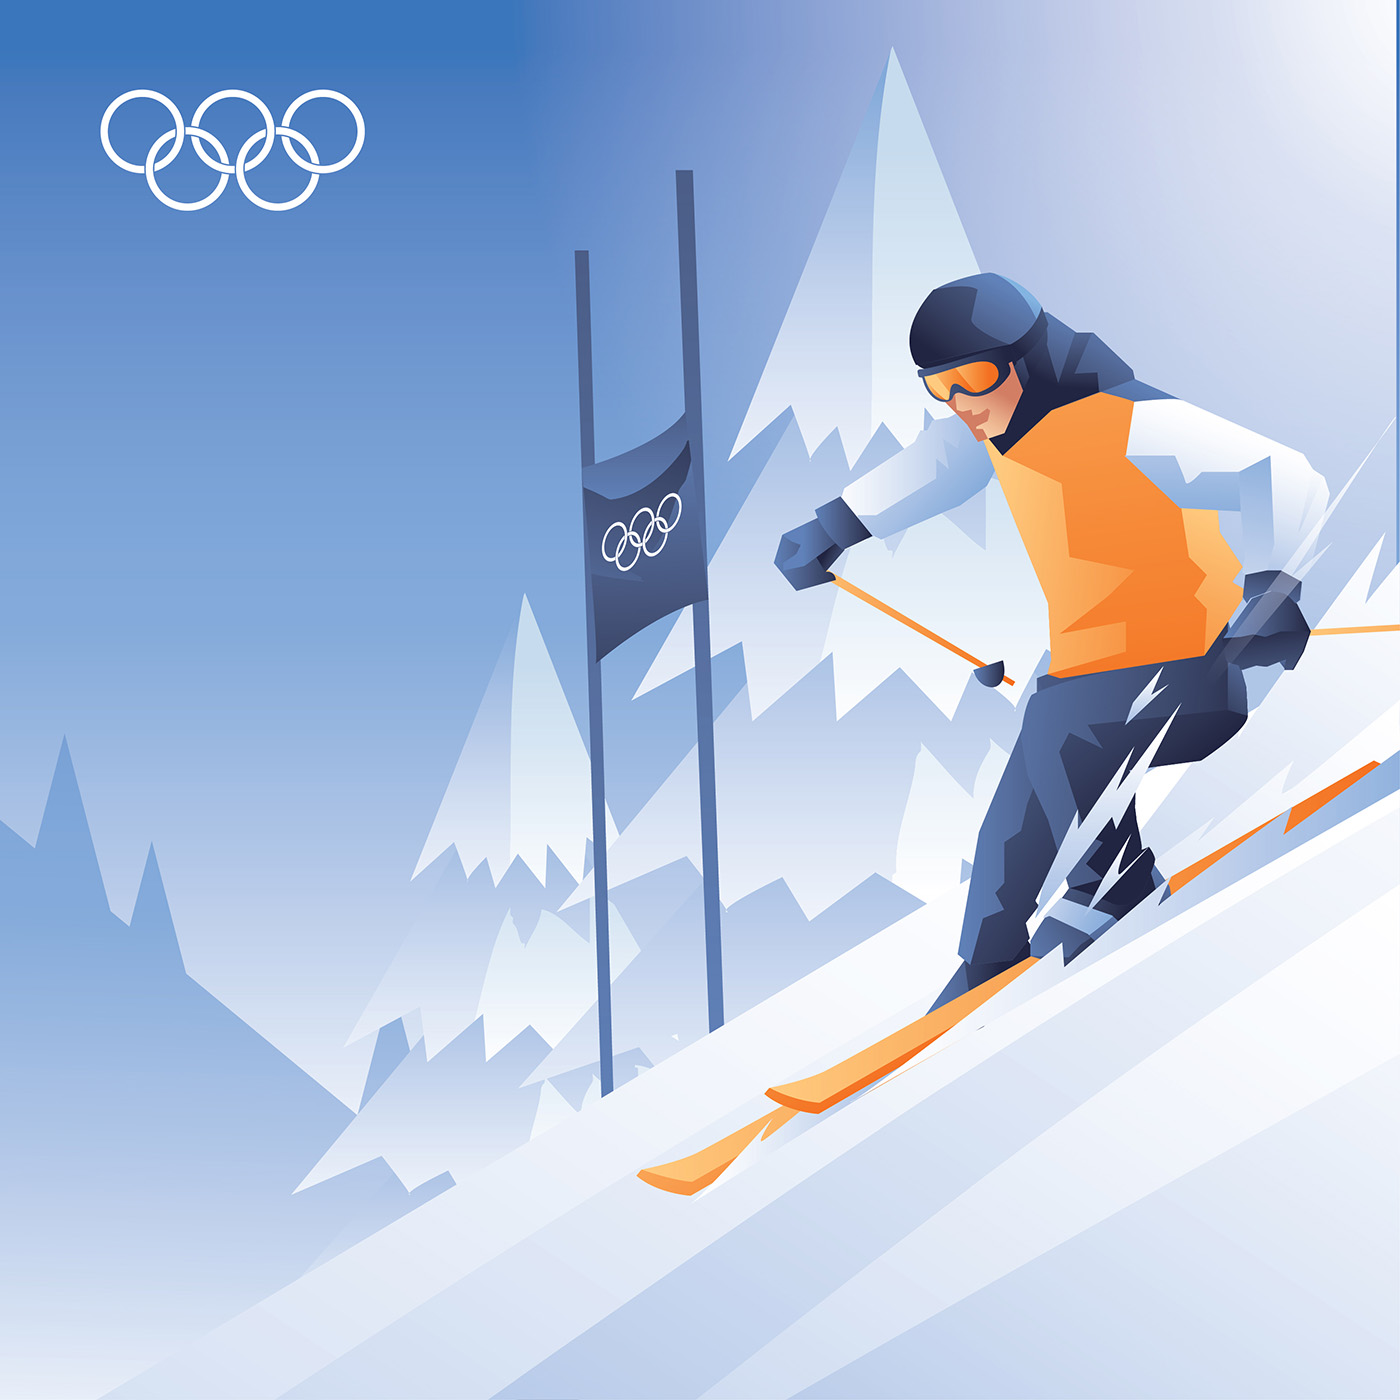 Download the Snow Skiing Vector 179706